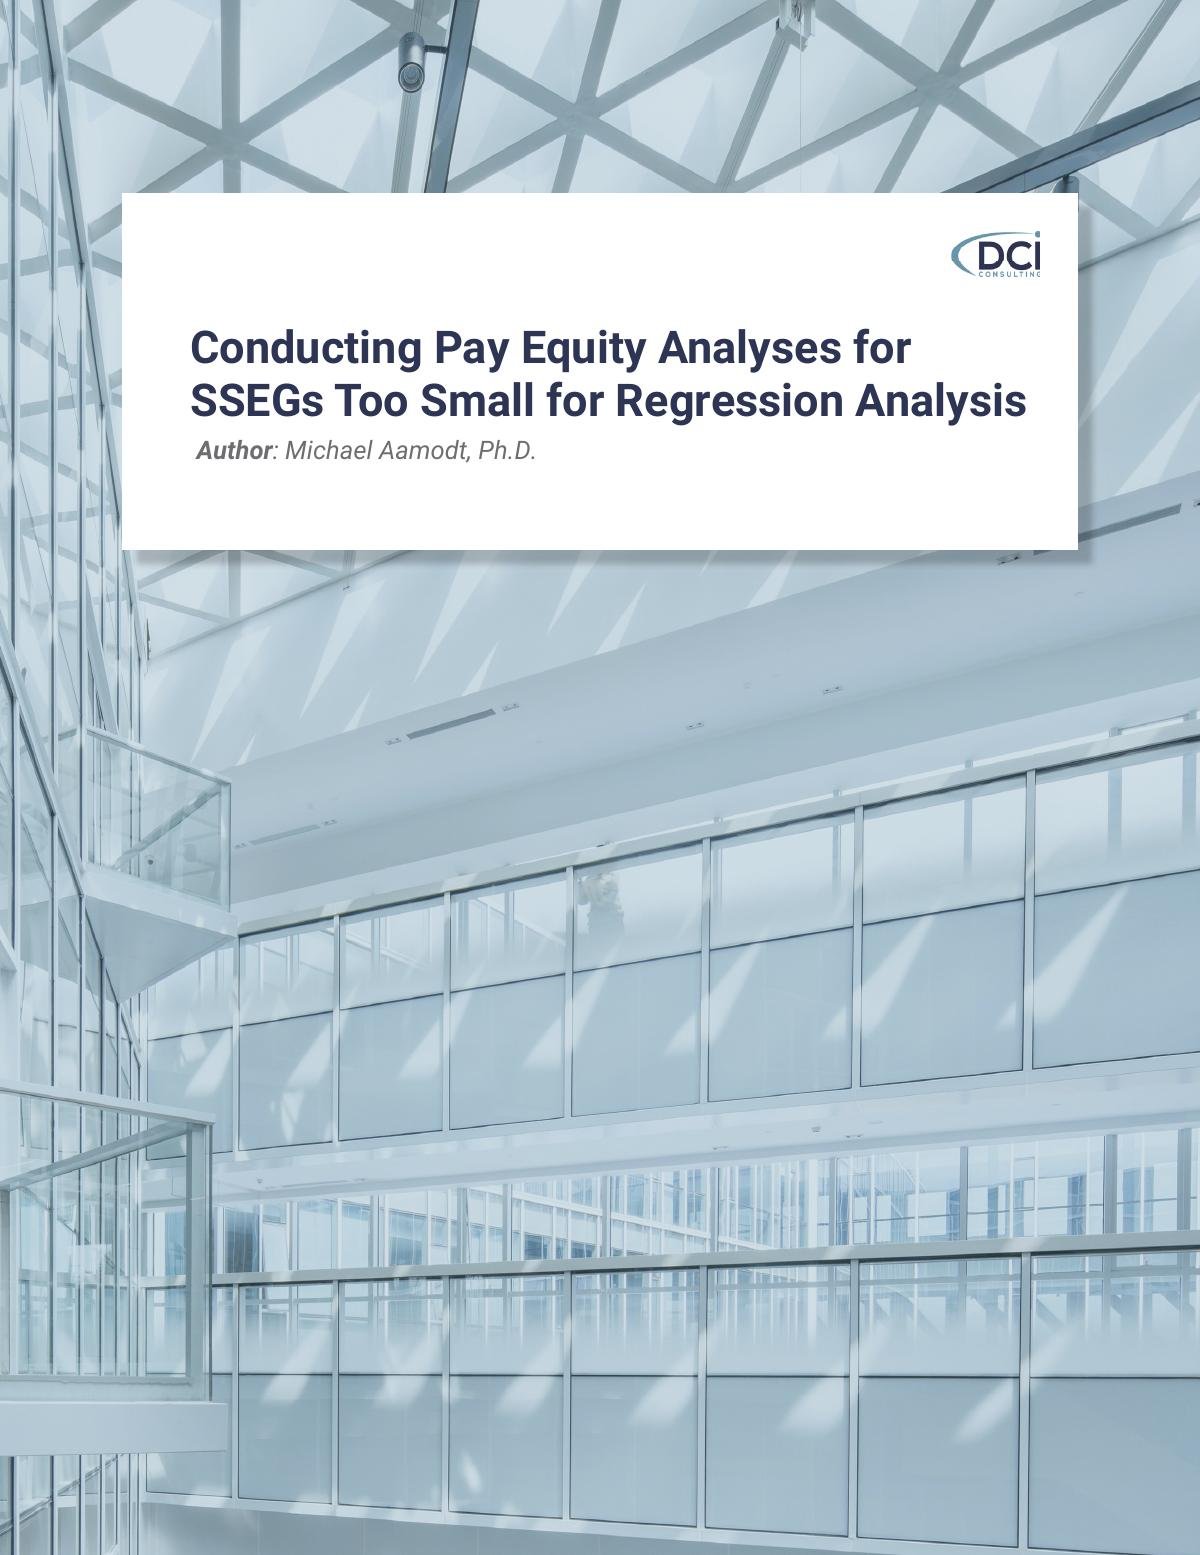 Conducting Pay Equity Analyses for SSEGs Too Small for Regression Analysis